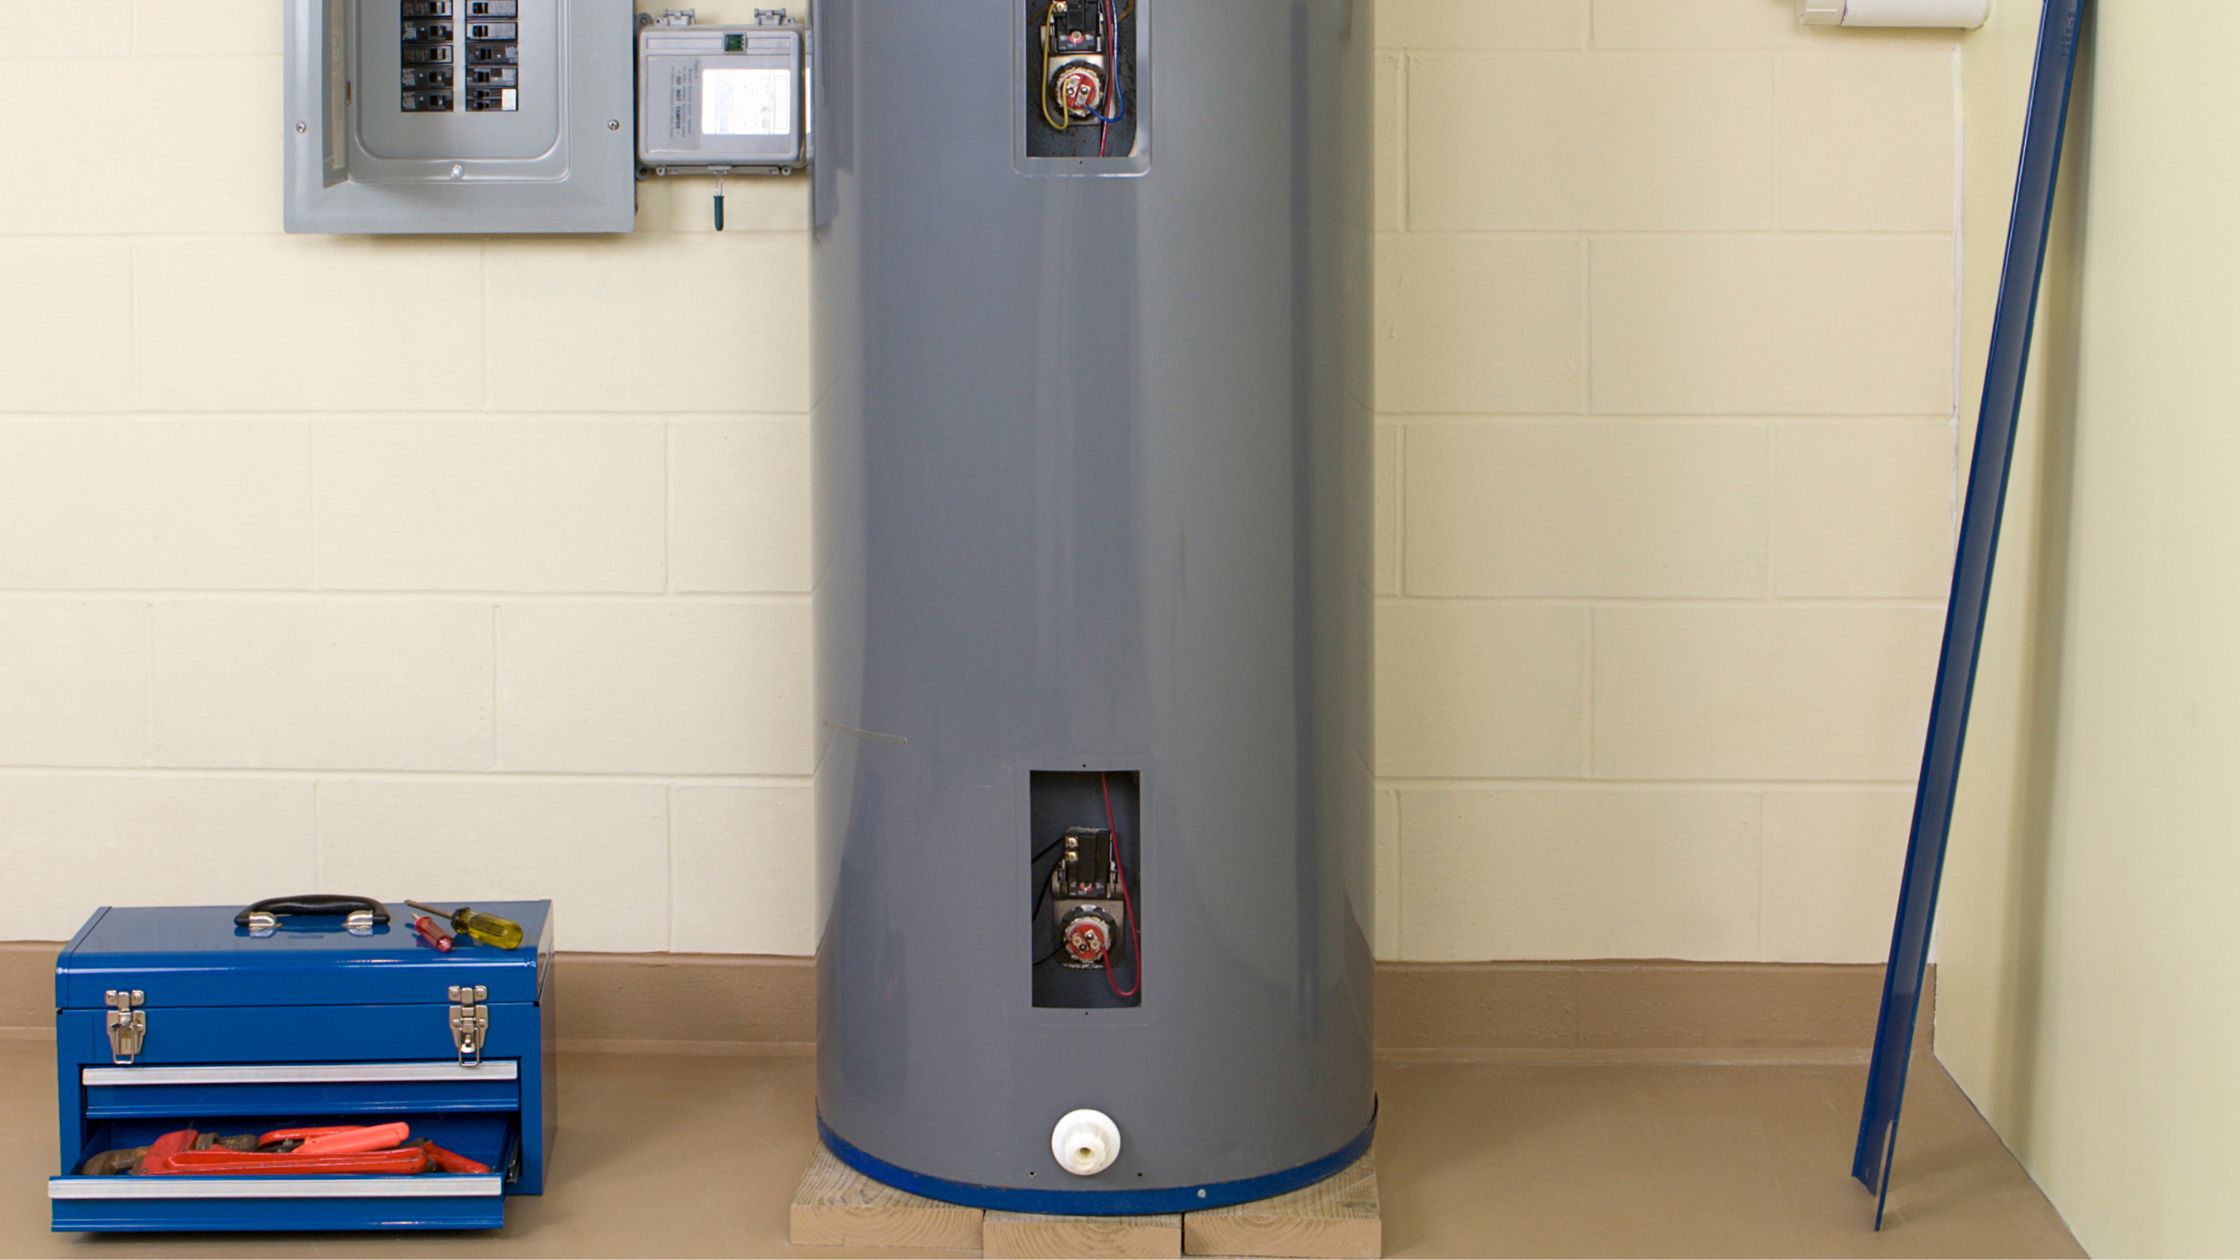 Flushing Your Water Heater: The Why, When, And How